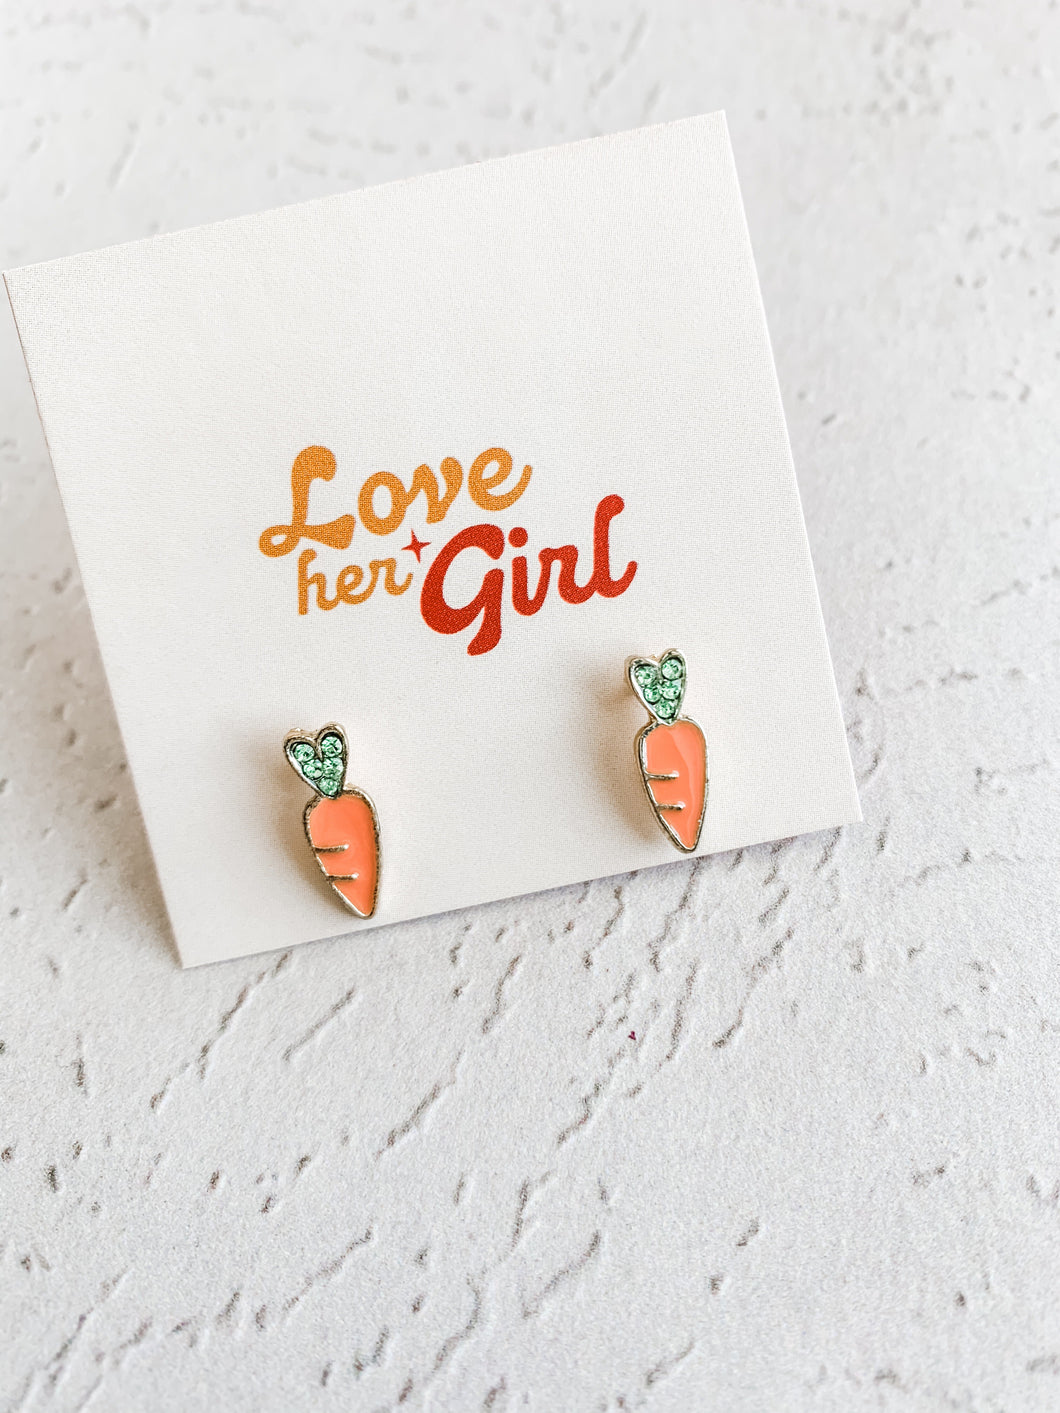 Keep Calm and Carrot On Earring Studs